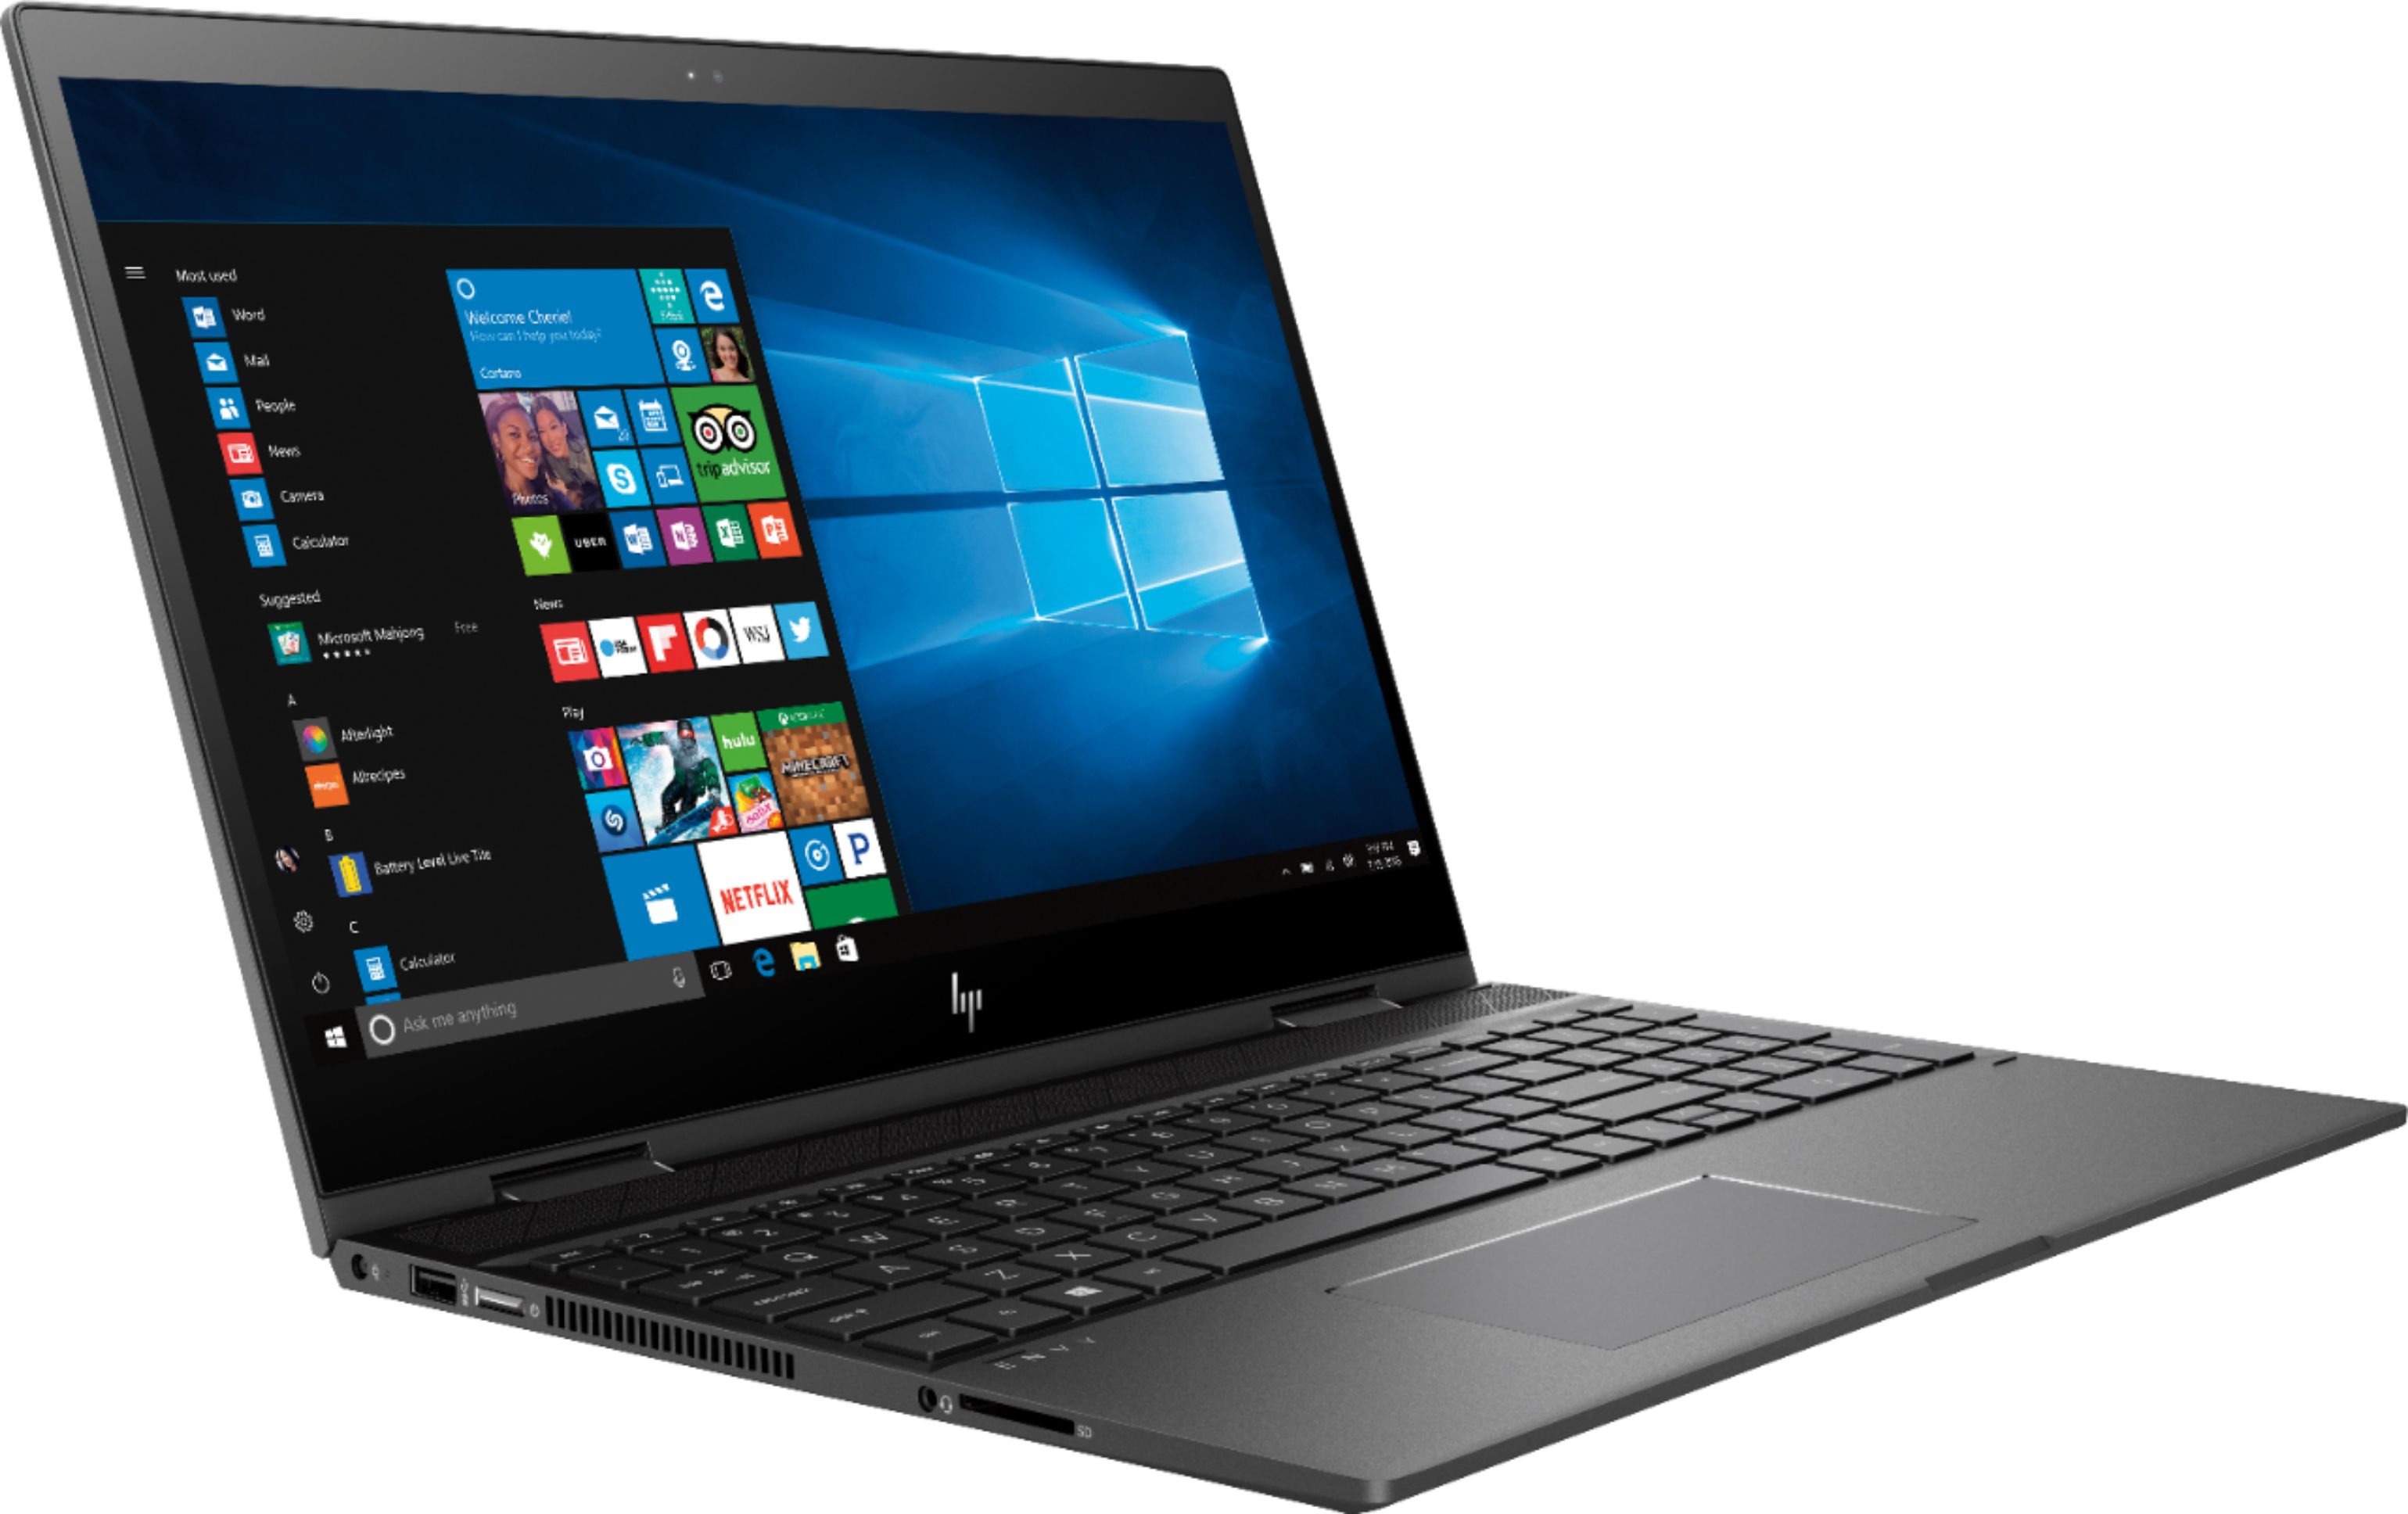 HP Envy x360 two-in-one technology